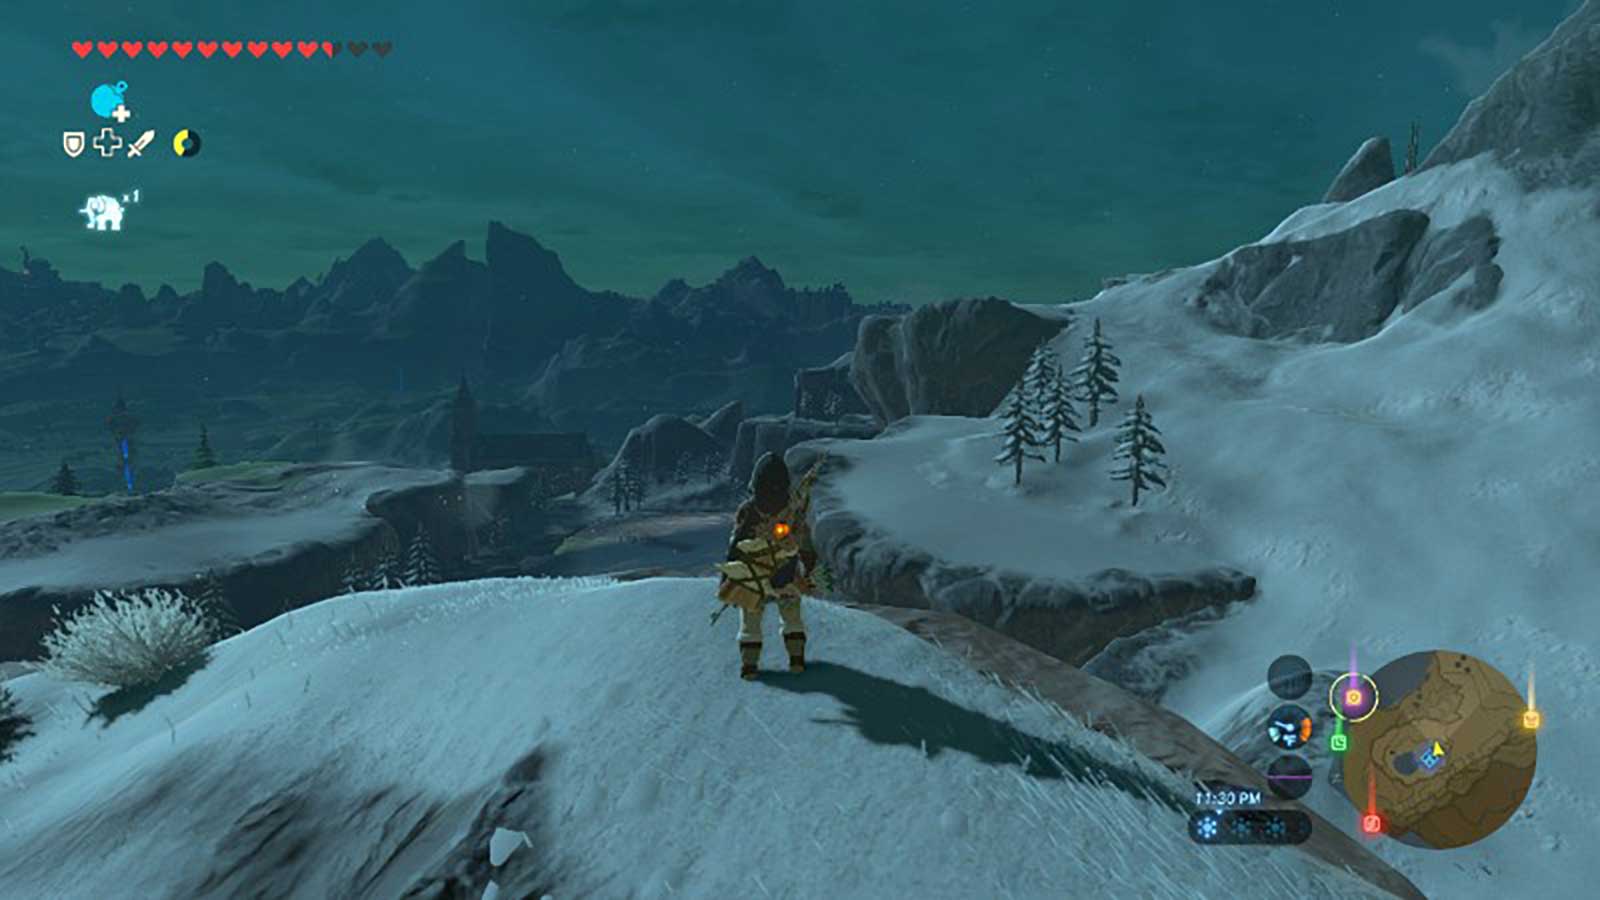 Link staring out into the snowy countryside